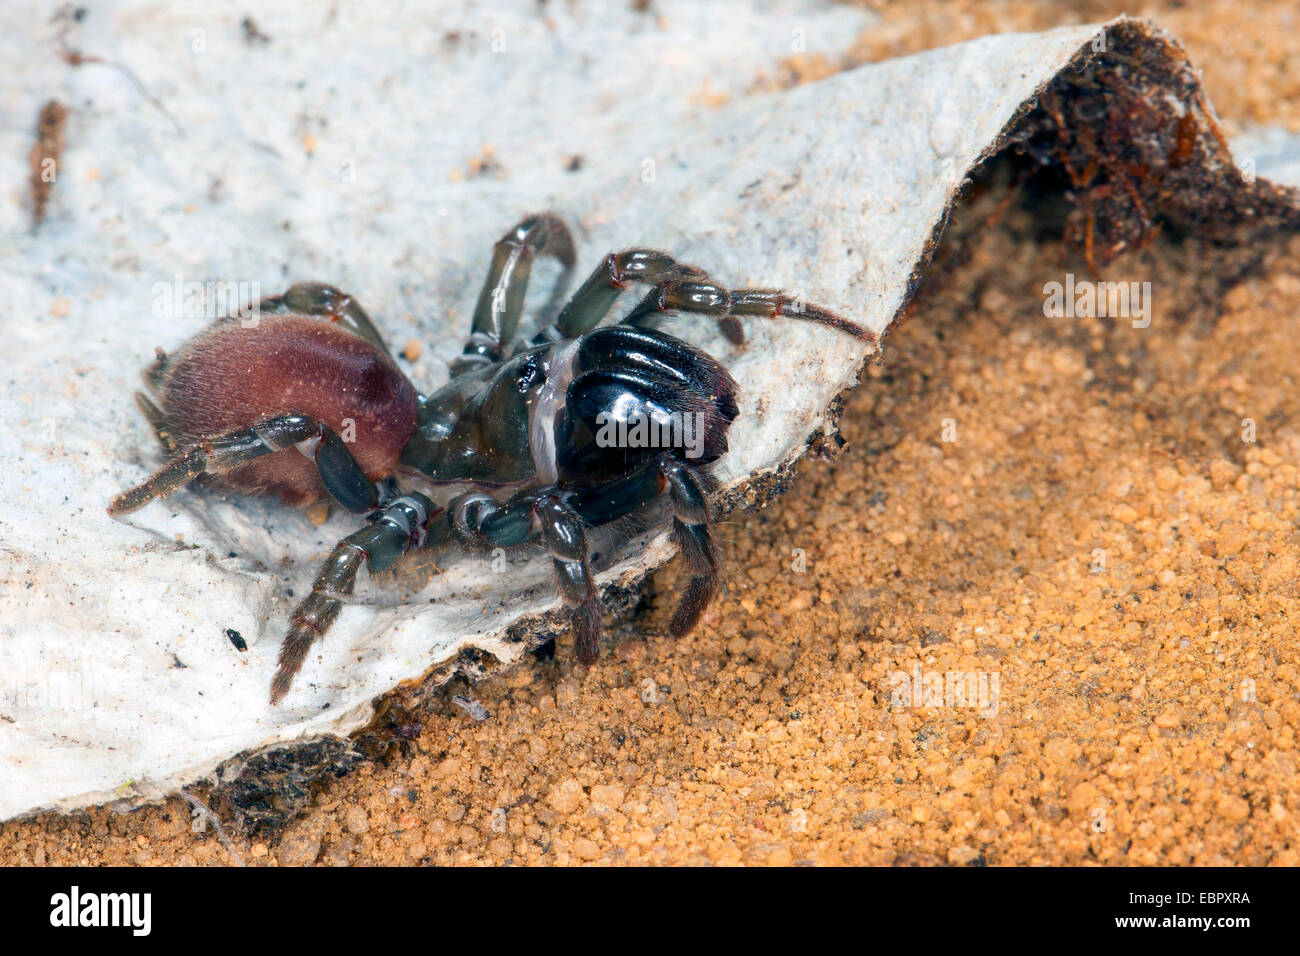 purse-web spider (Atypus affinis), on its web, Germany Stock Photo